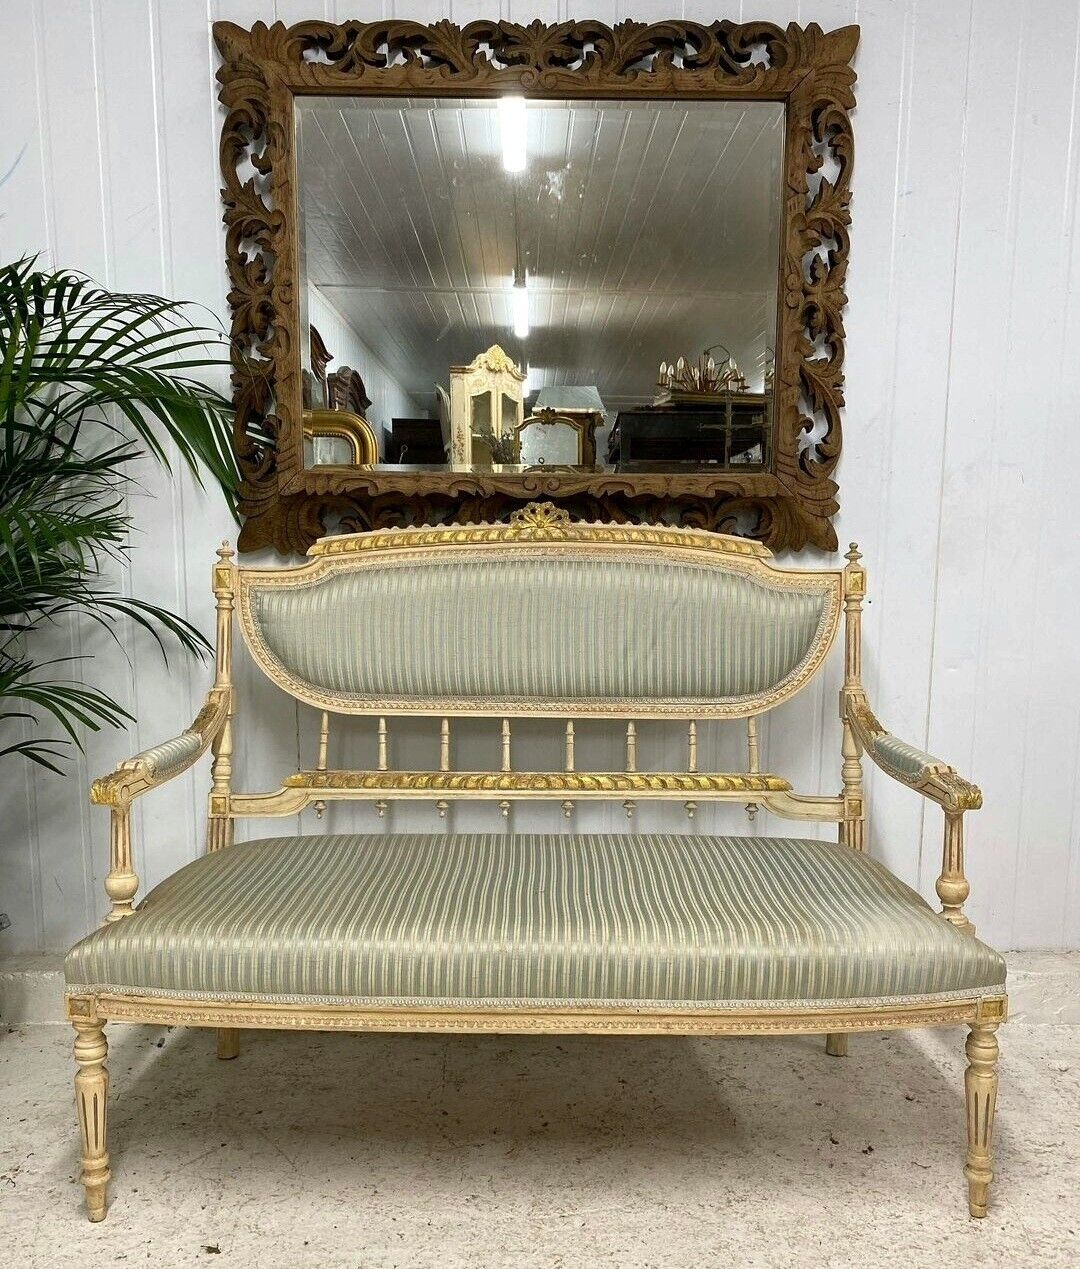 Late 19th century Guilded French Sofa